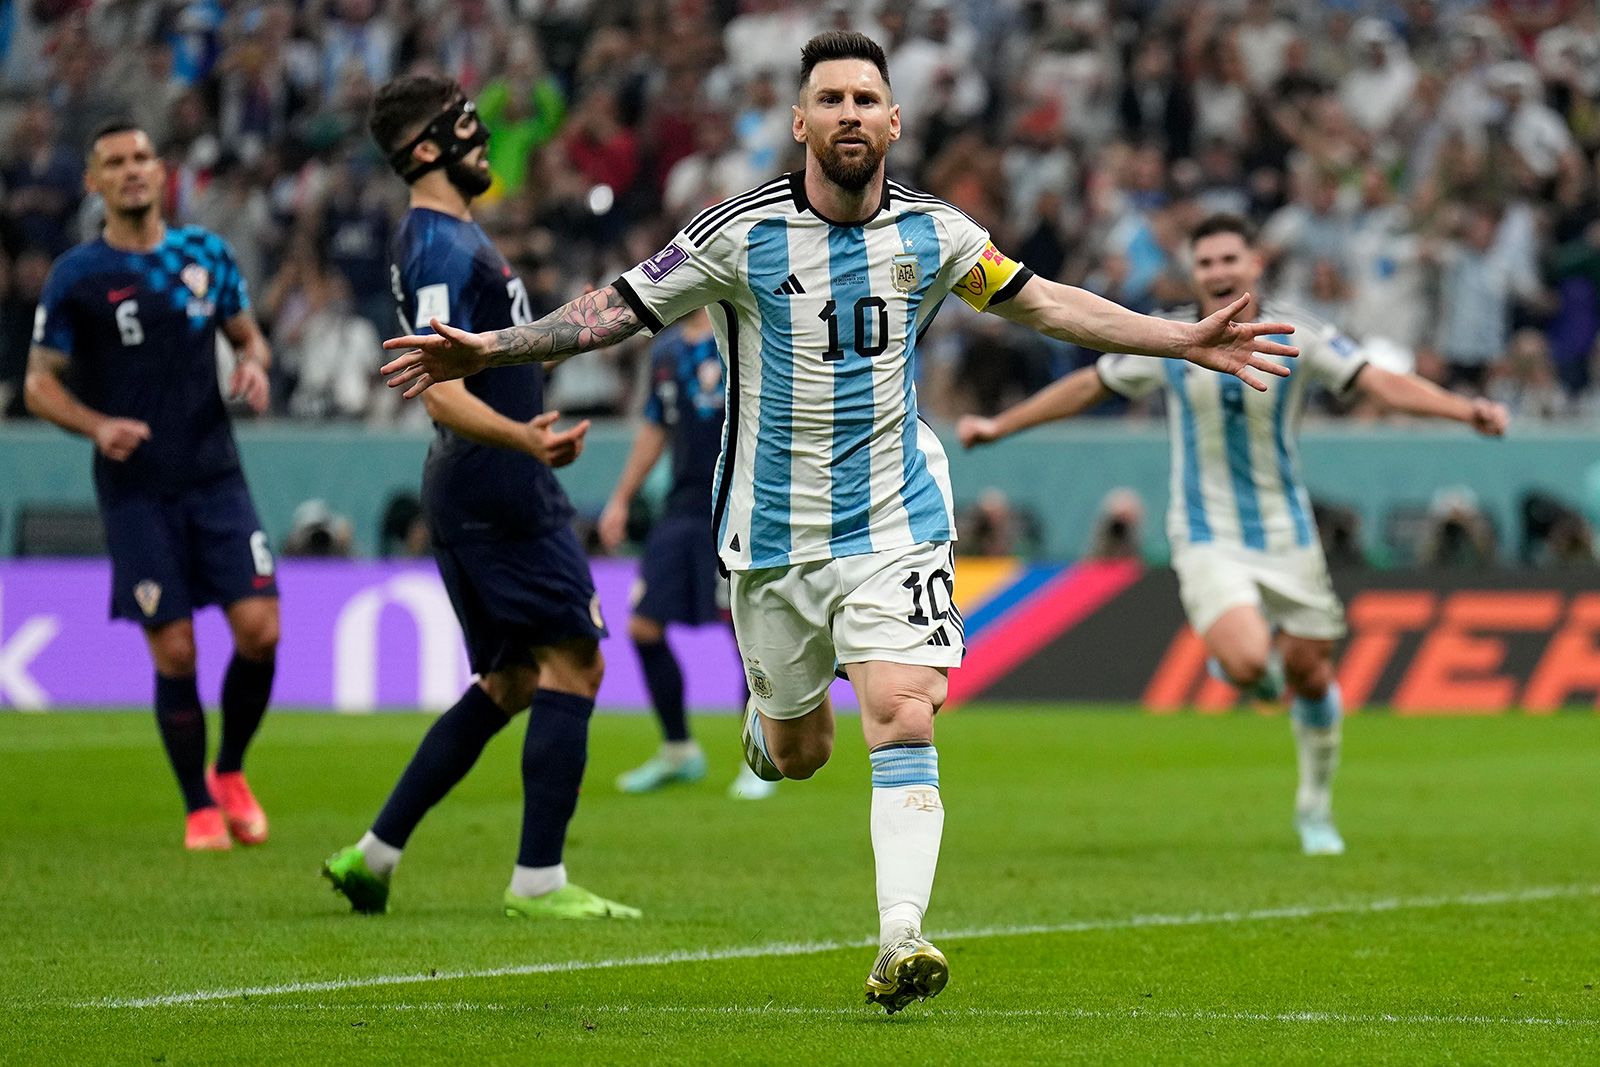 Lionel Messi is already impacting US soccer